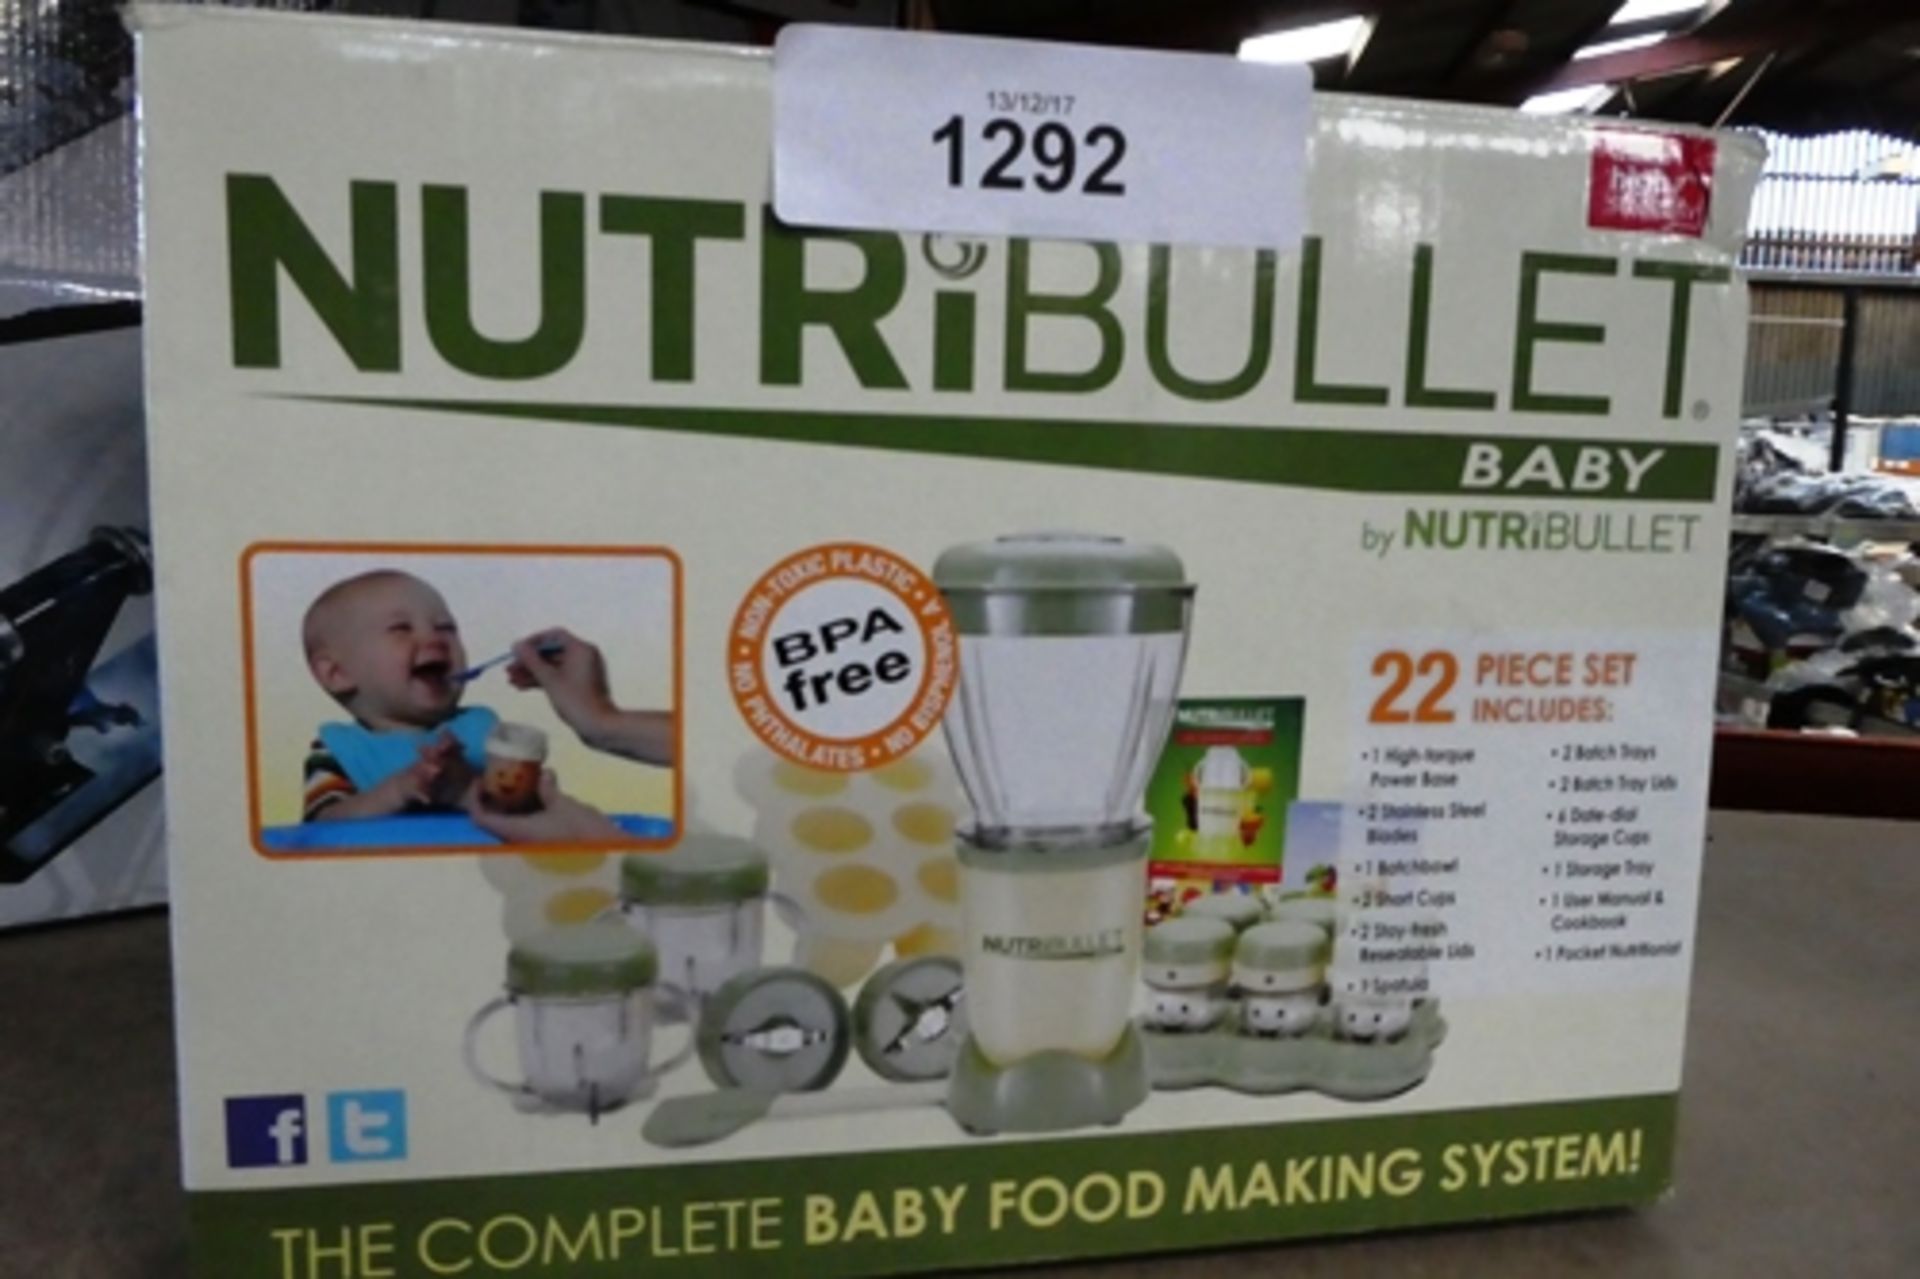 1 x Nutribullet baby 22 piece set - Appears new, in open box, contents unchecked (bay 27)